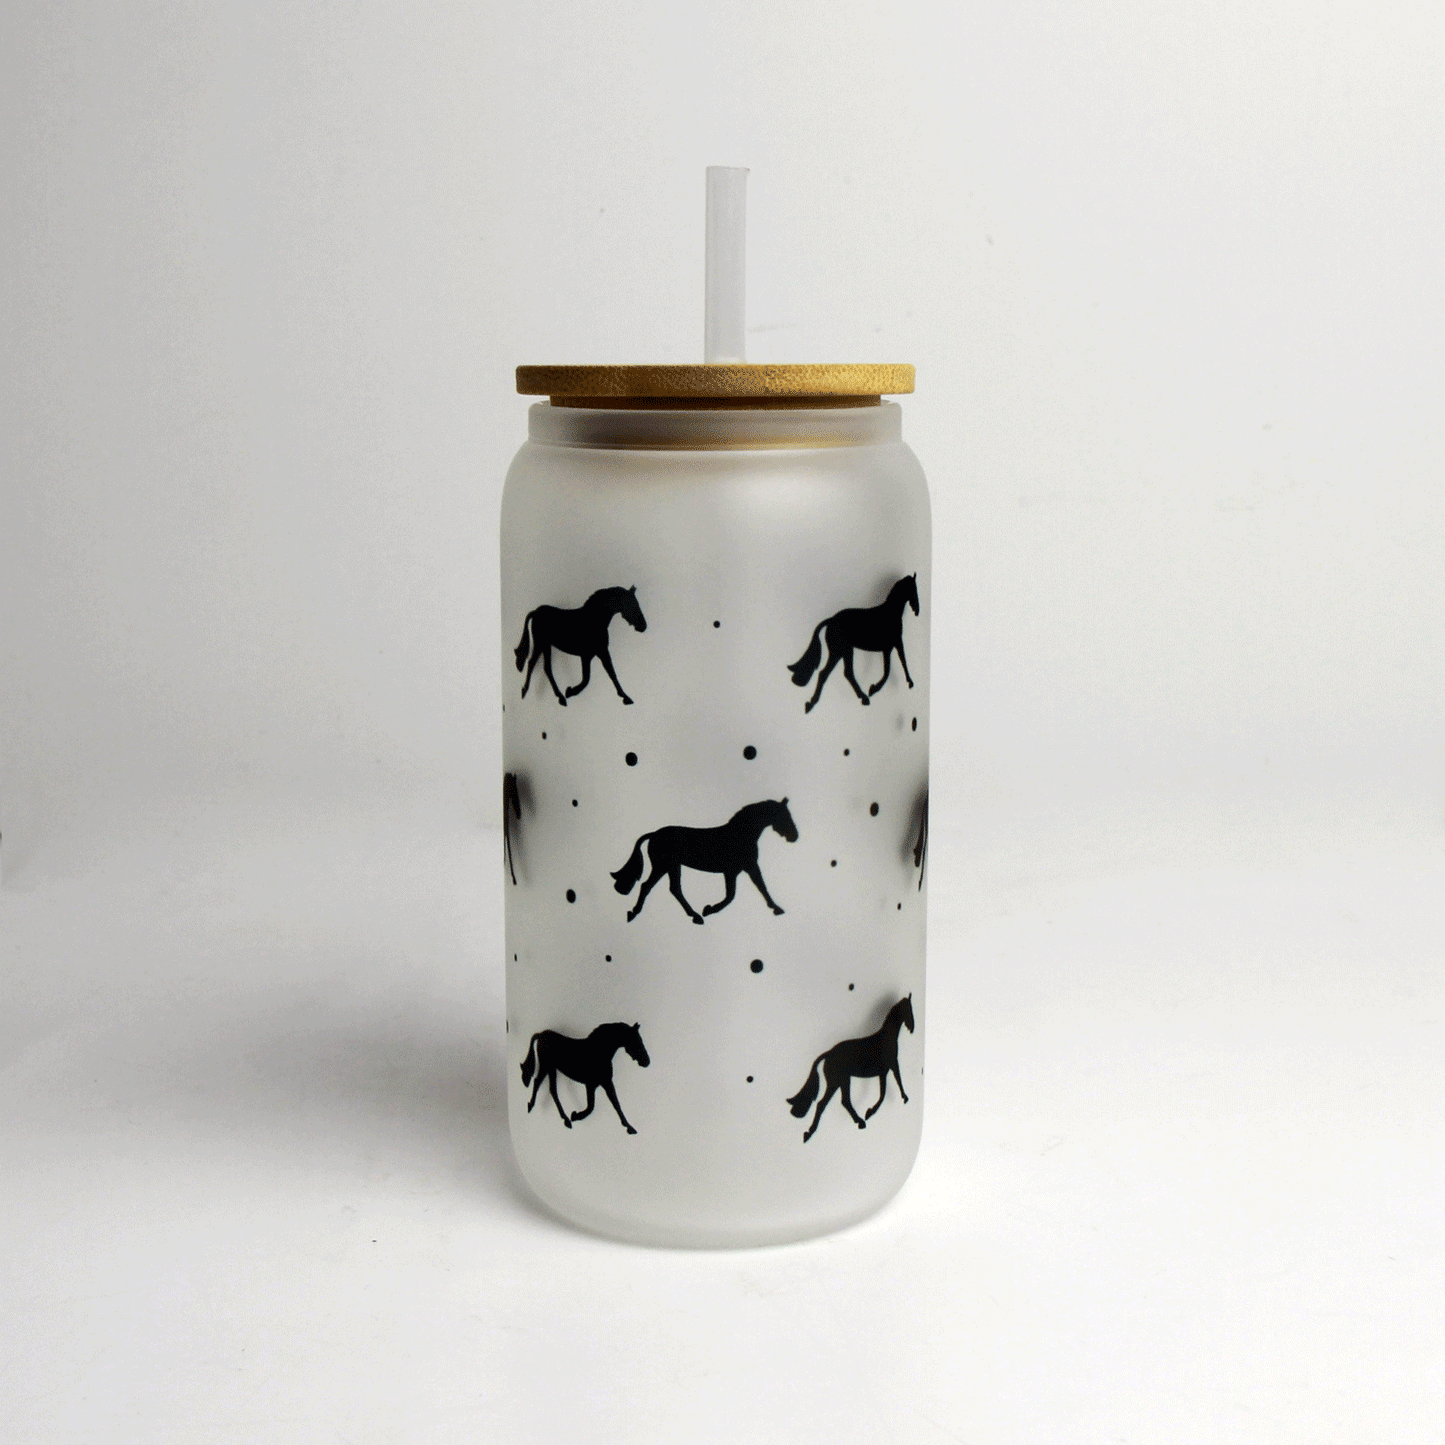 Trotting Horse Glass Tumbler with Bamboo Lid and Straw